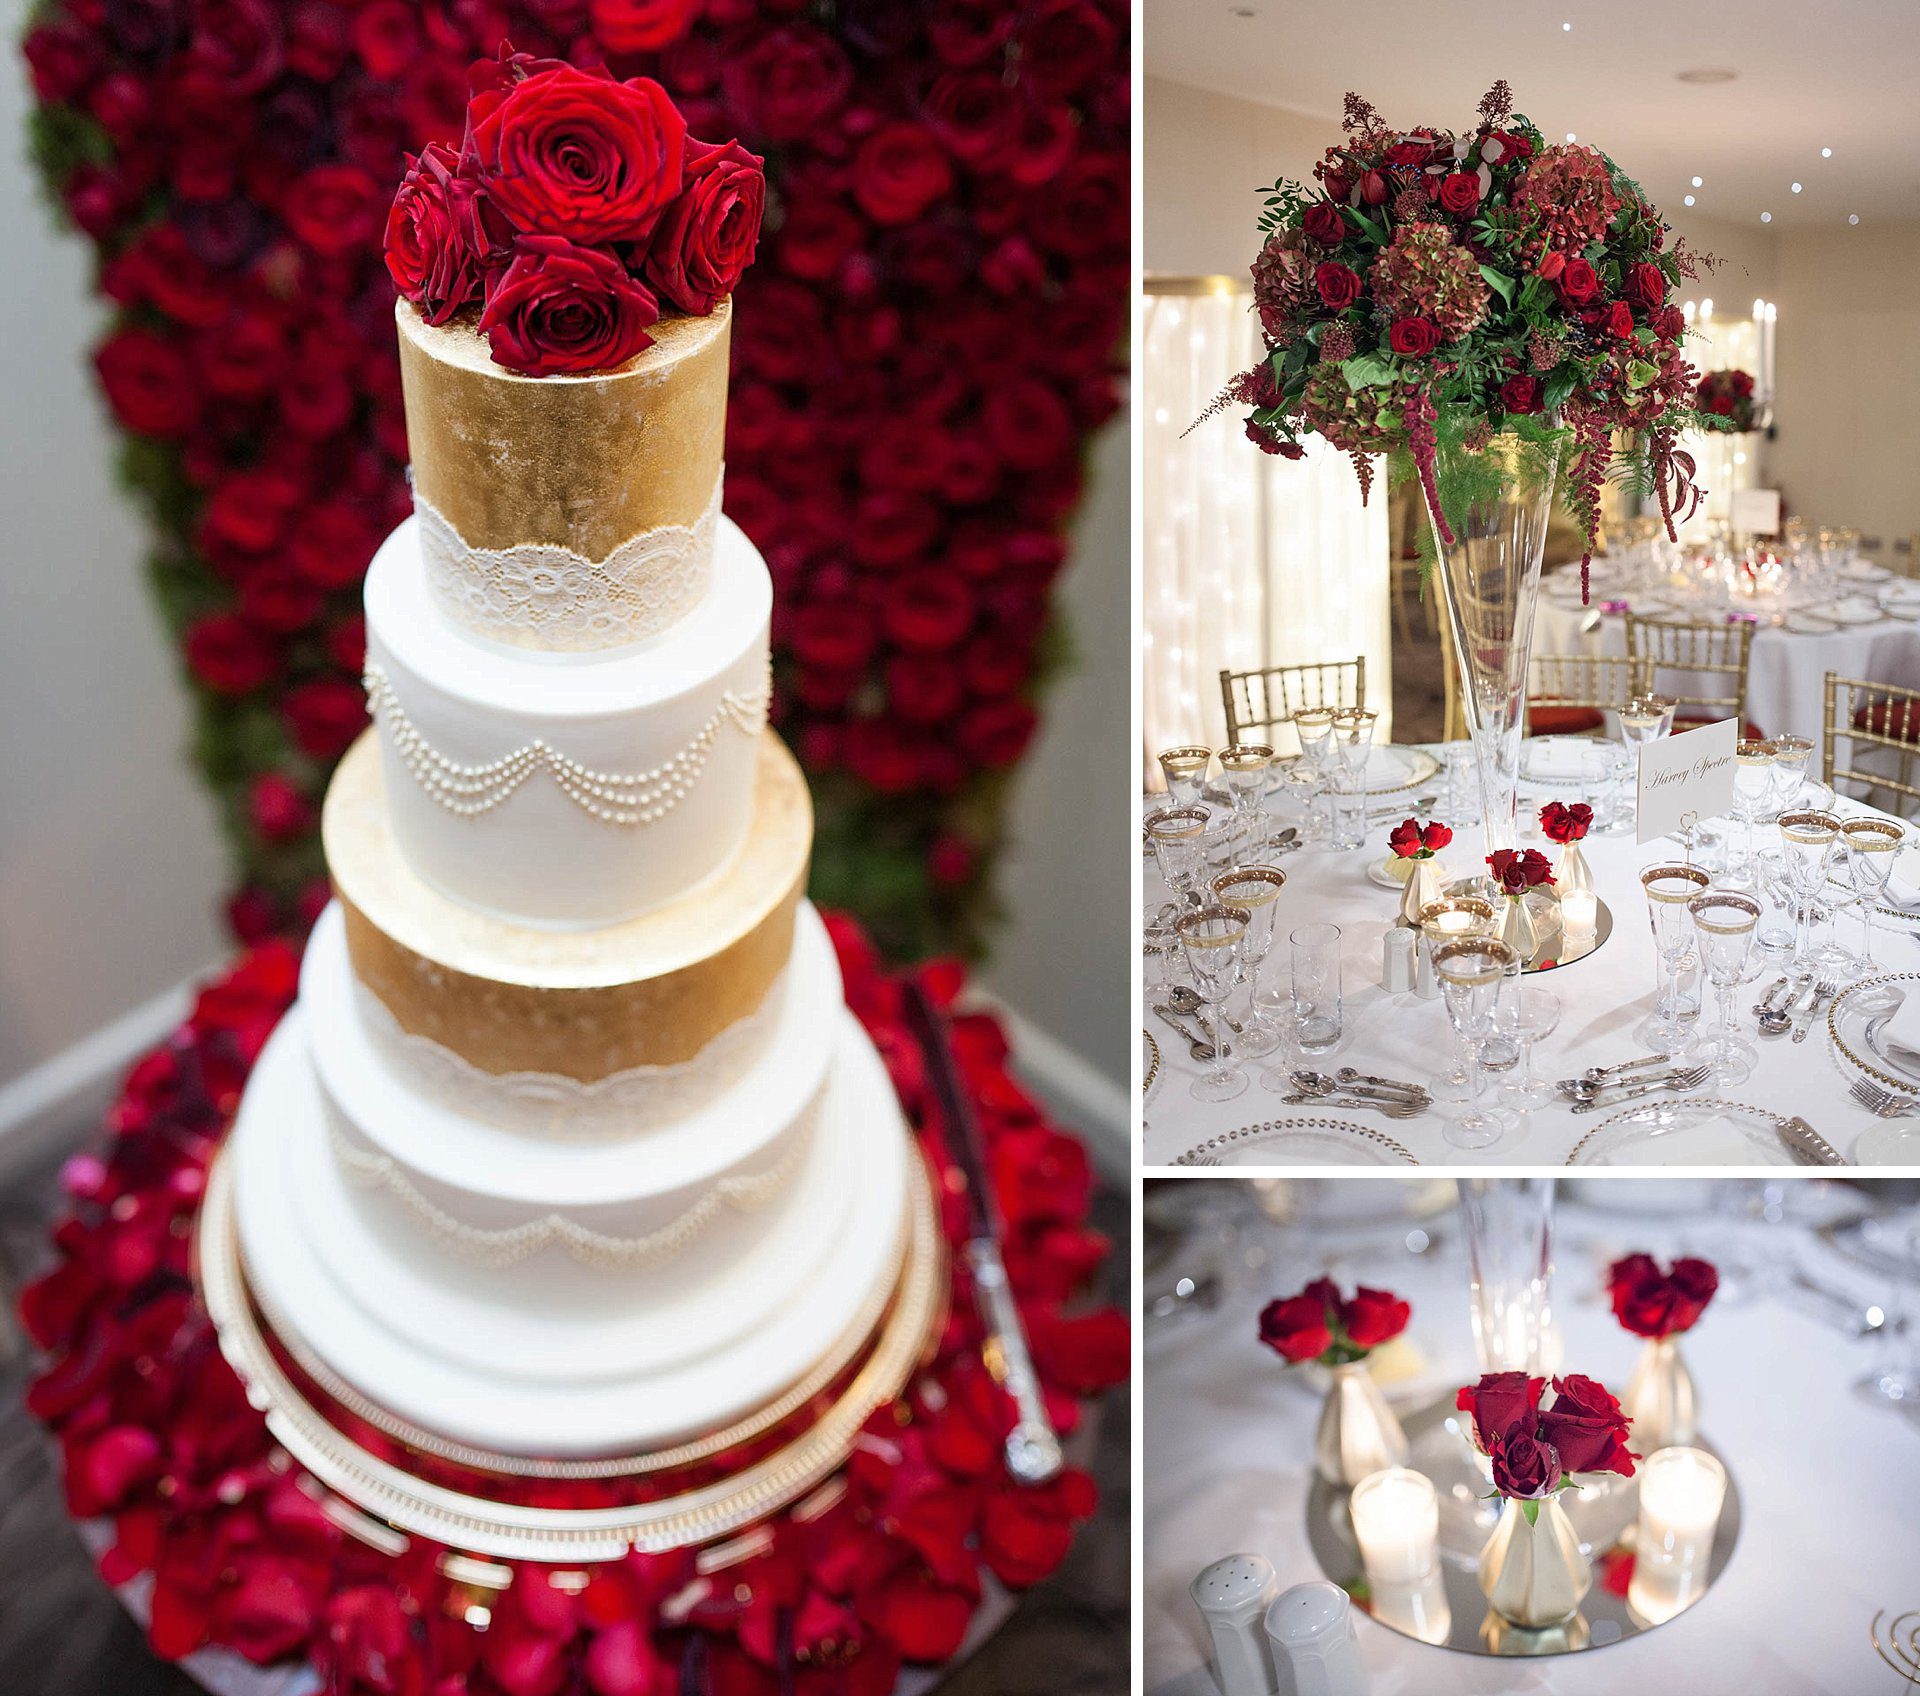 Wedding cake and red roses